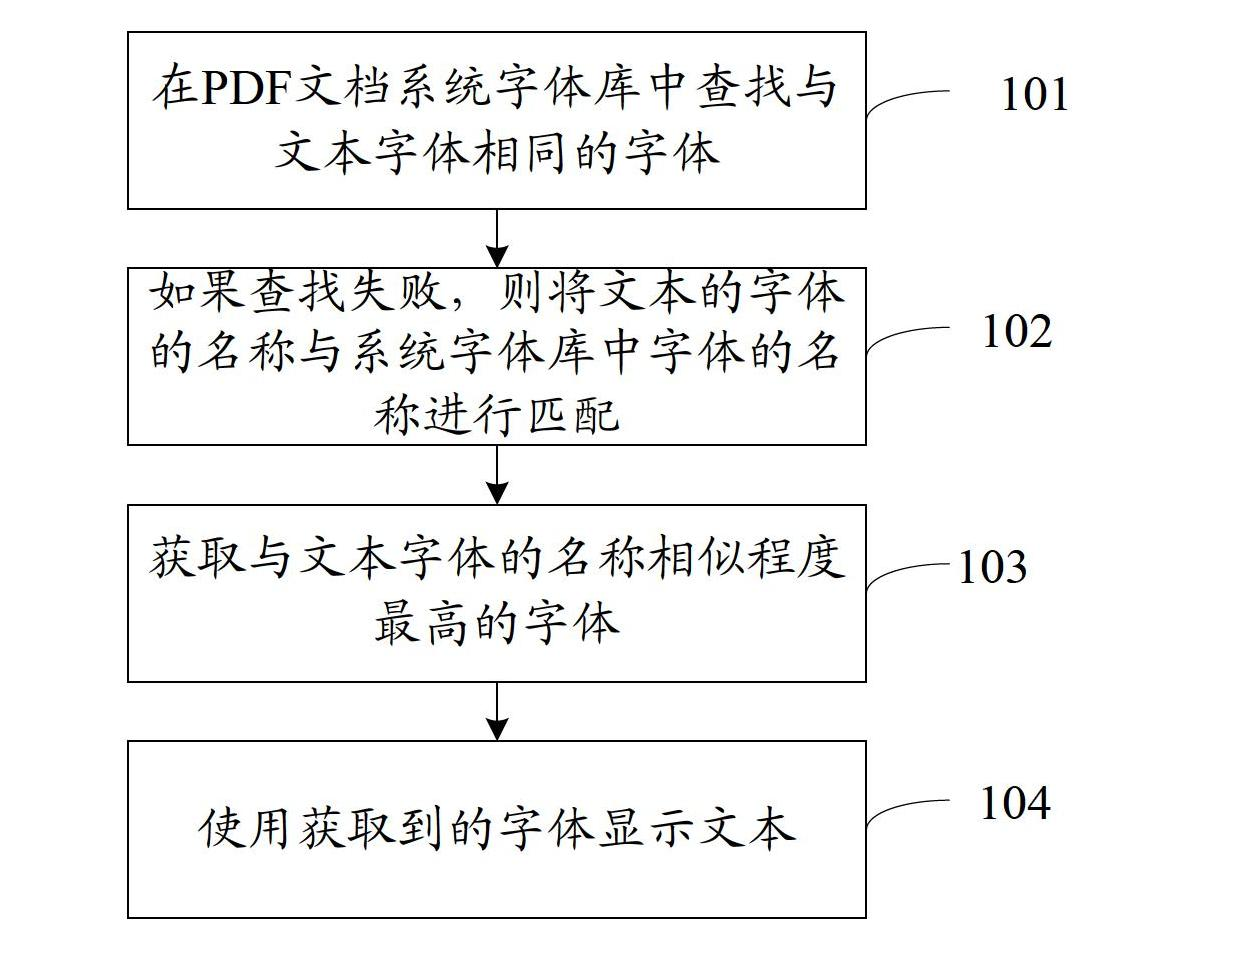 Method and system for displaying text in PDF (portable document format) document